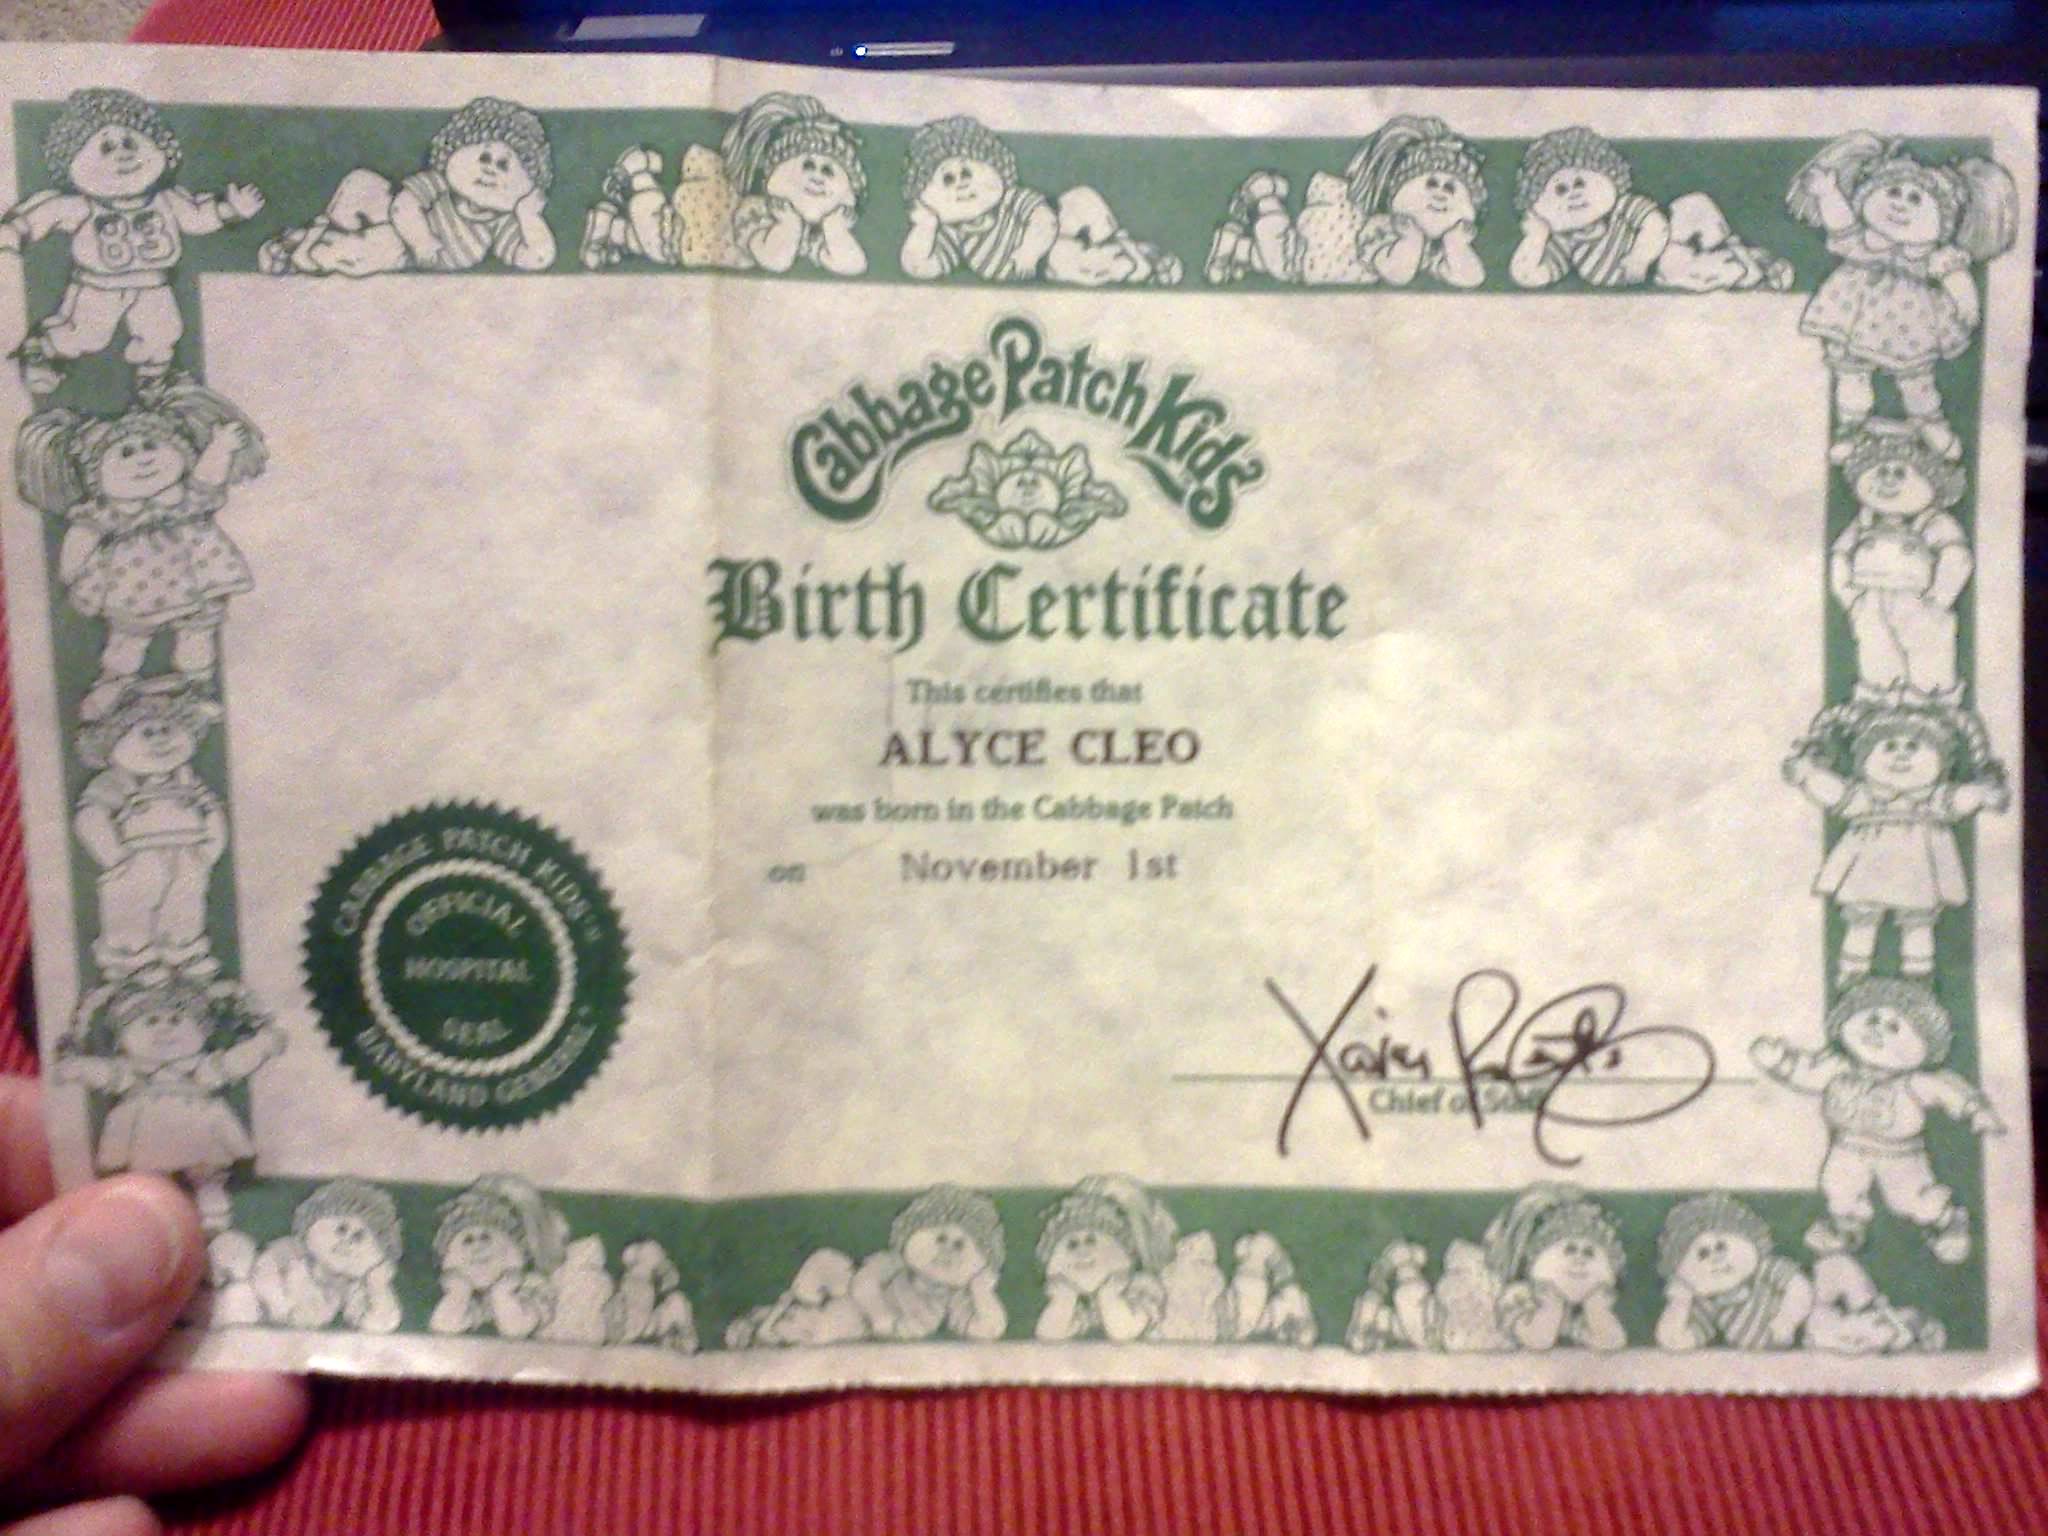 Cabbage patch birth certificate both sides print